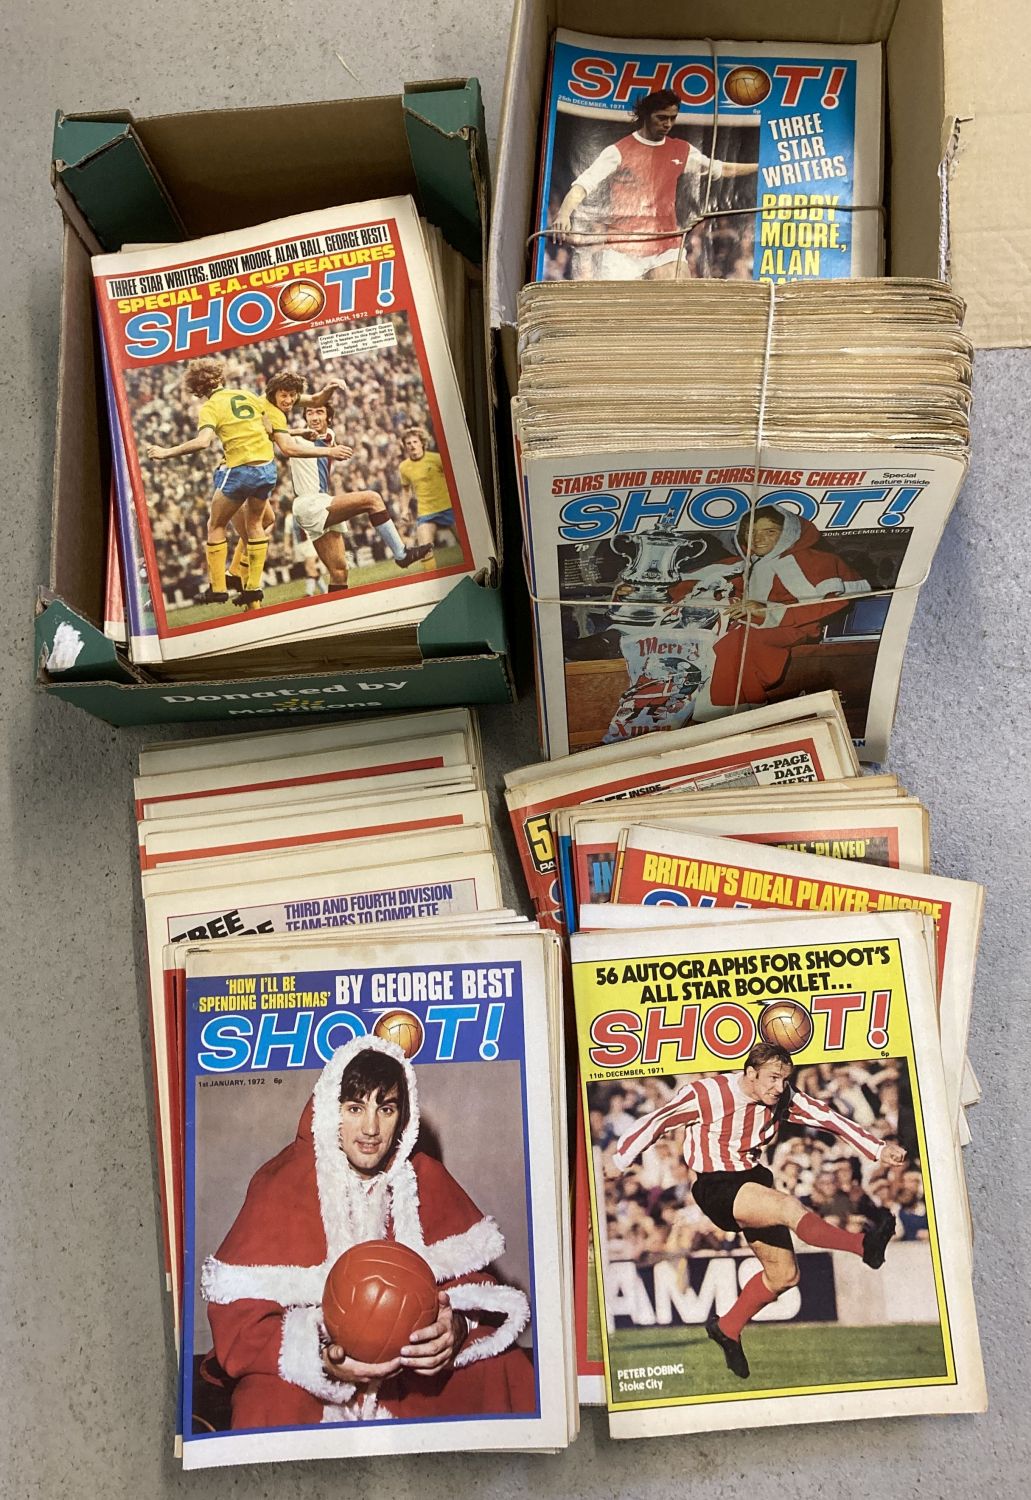 Approx. 180 copies of "Shoot" magazine dating from 1969-73.